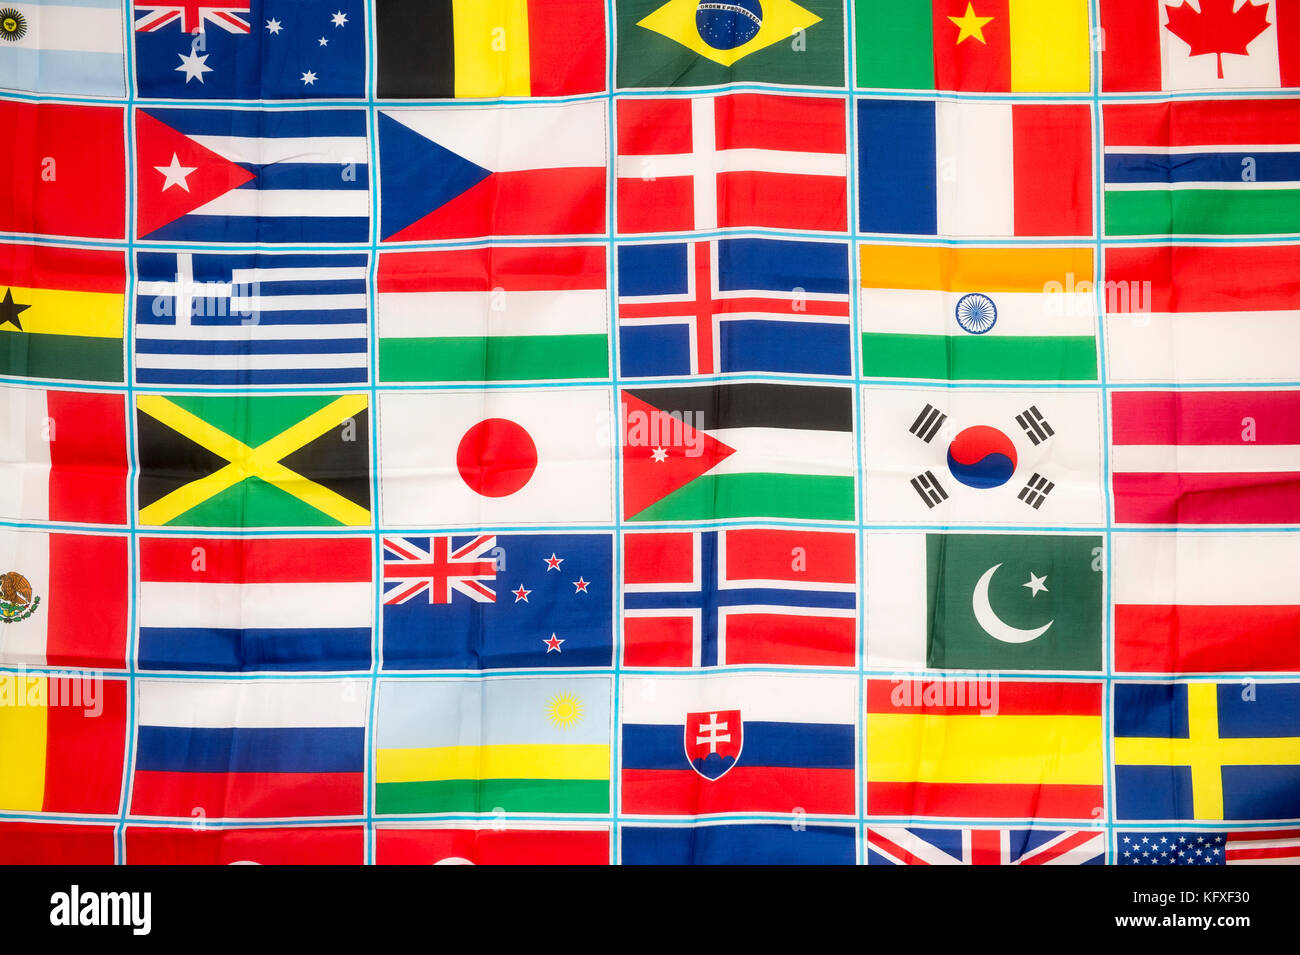 A school wall display showing some national flags of the world. Stock Photo